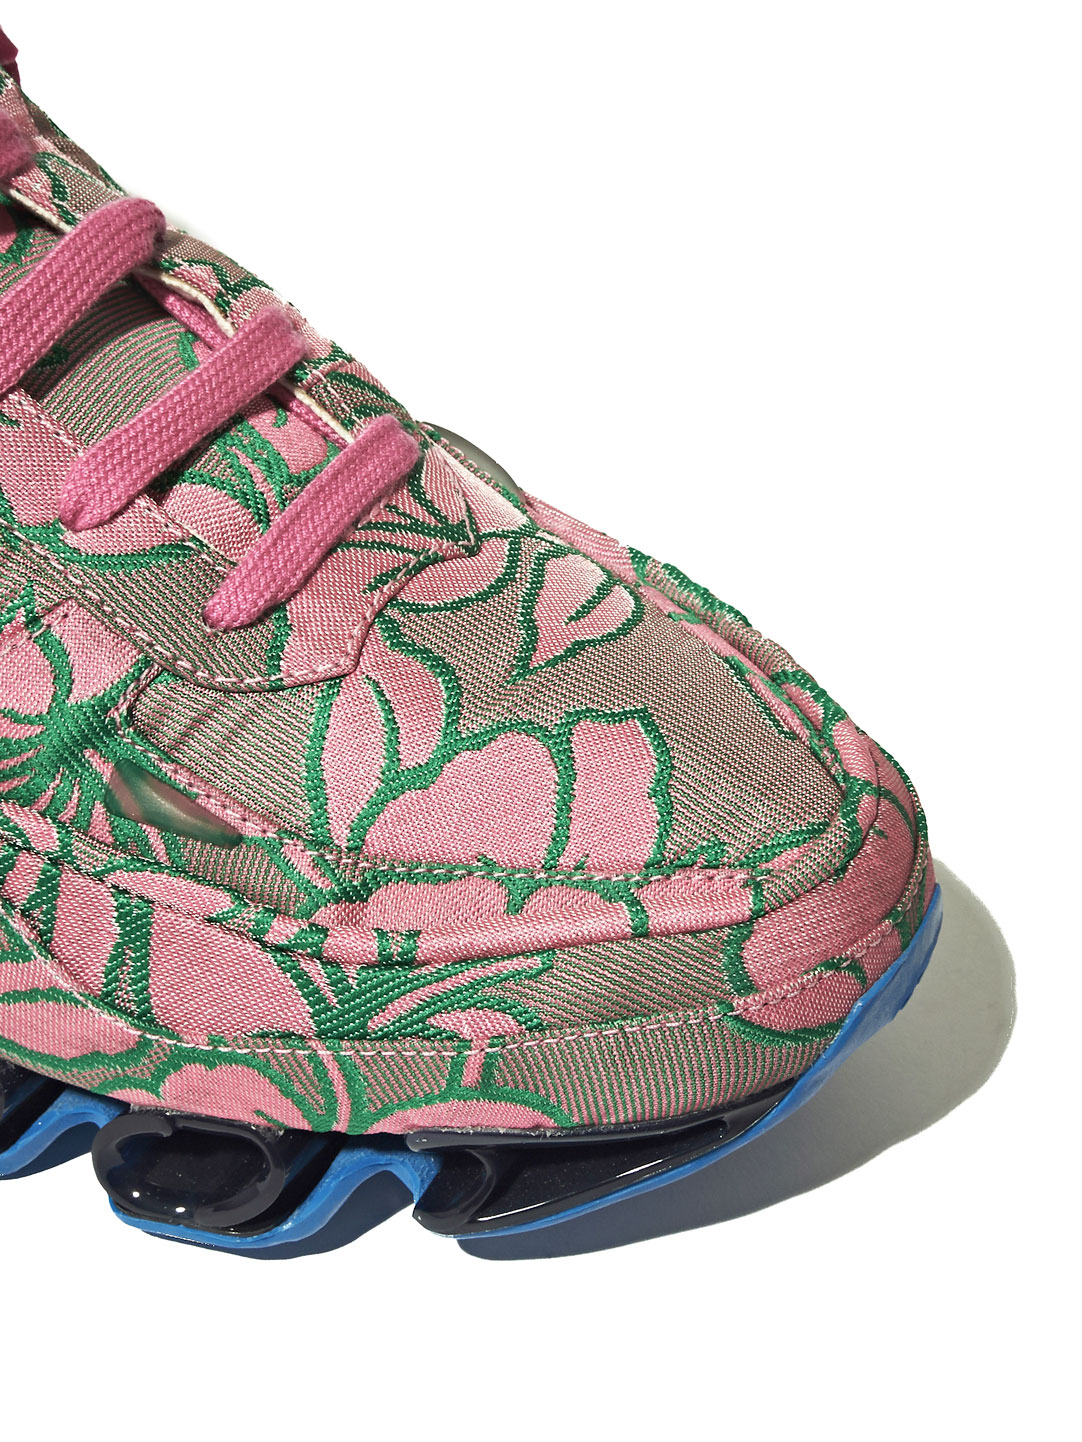 Lyst Raf Simons Bounce Sneakers in Pink for Men